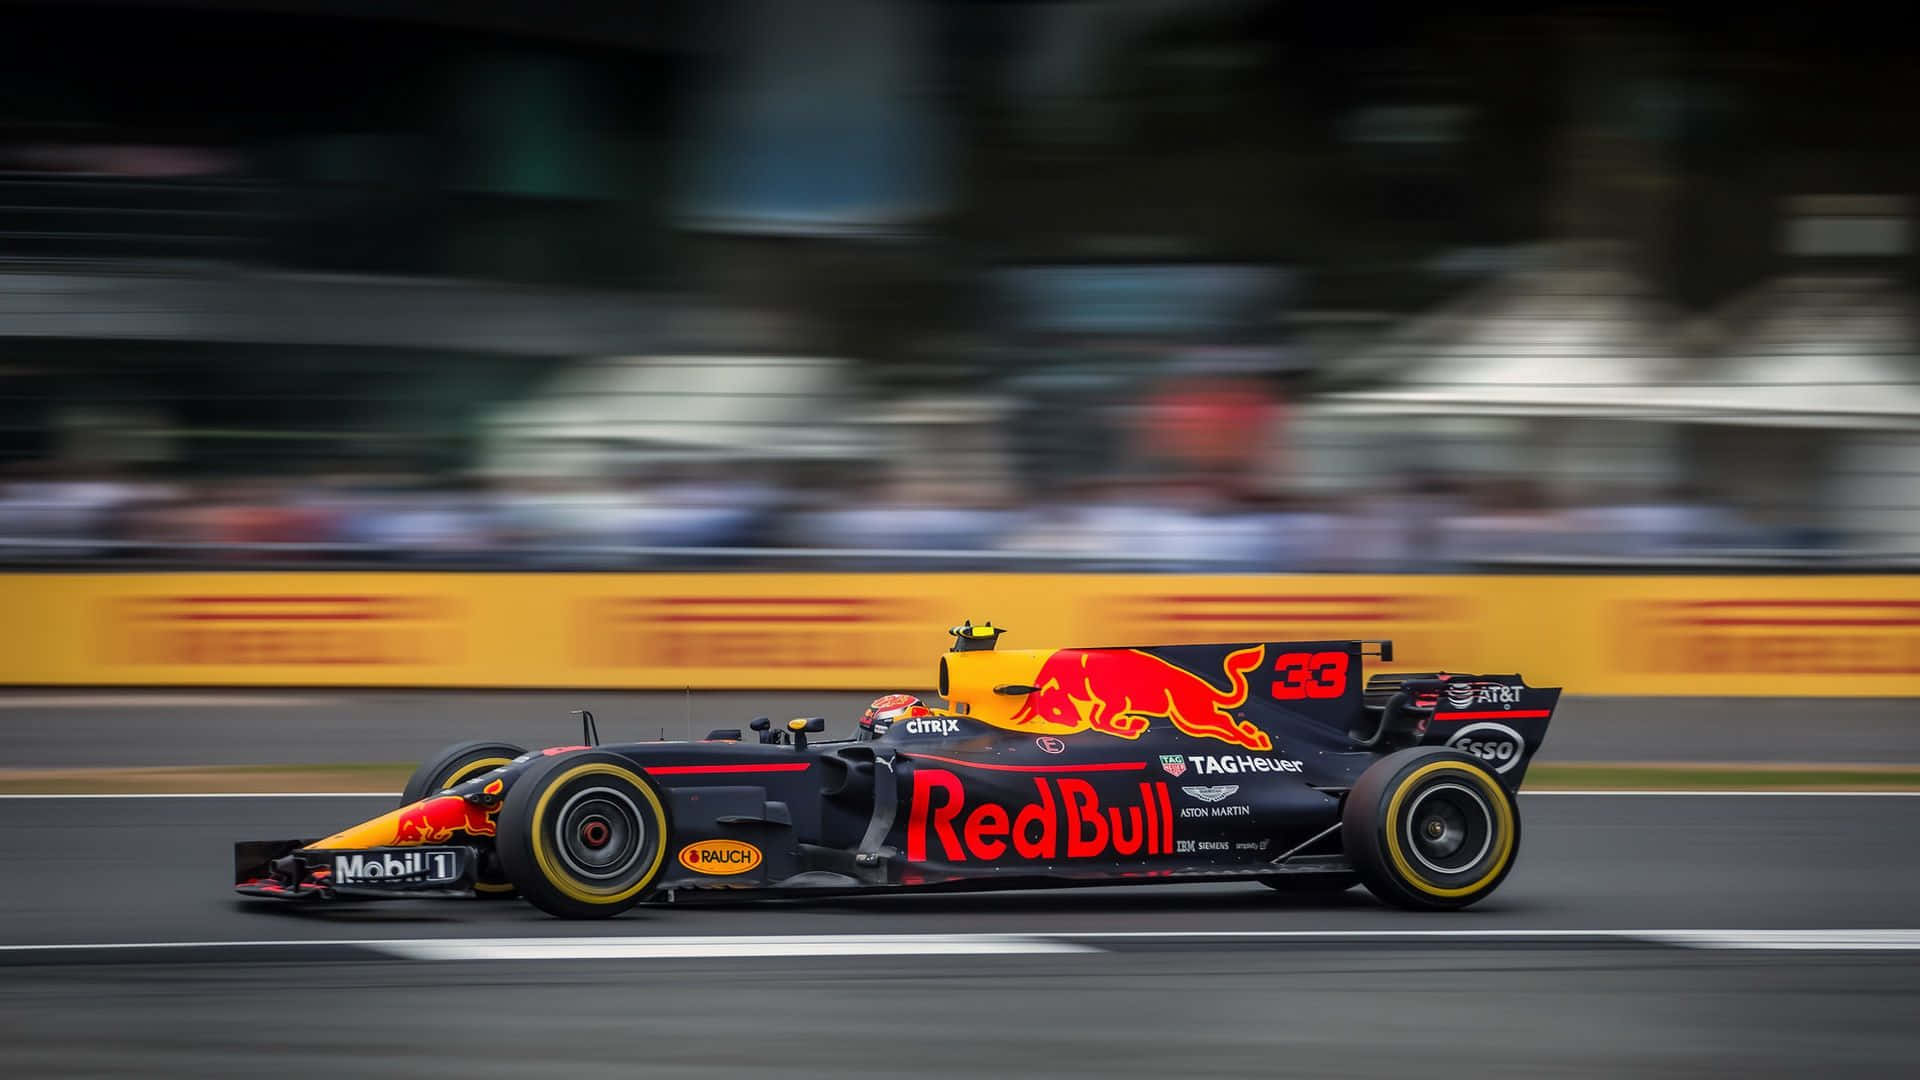 Max Verstappen in action on the race track